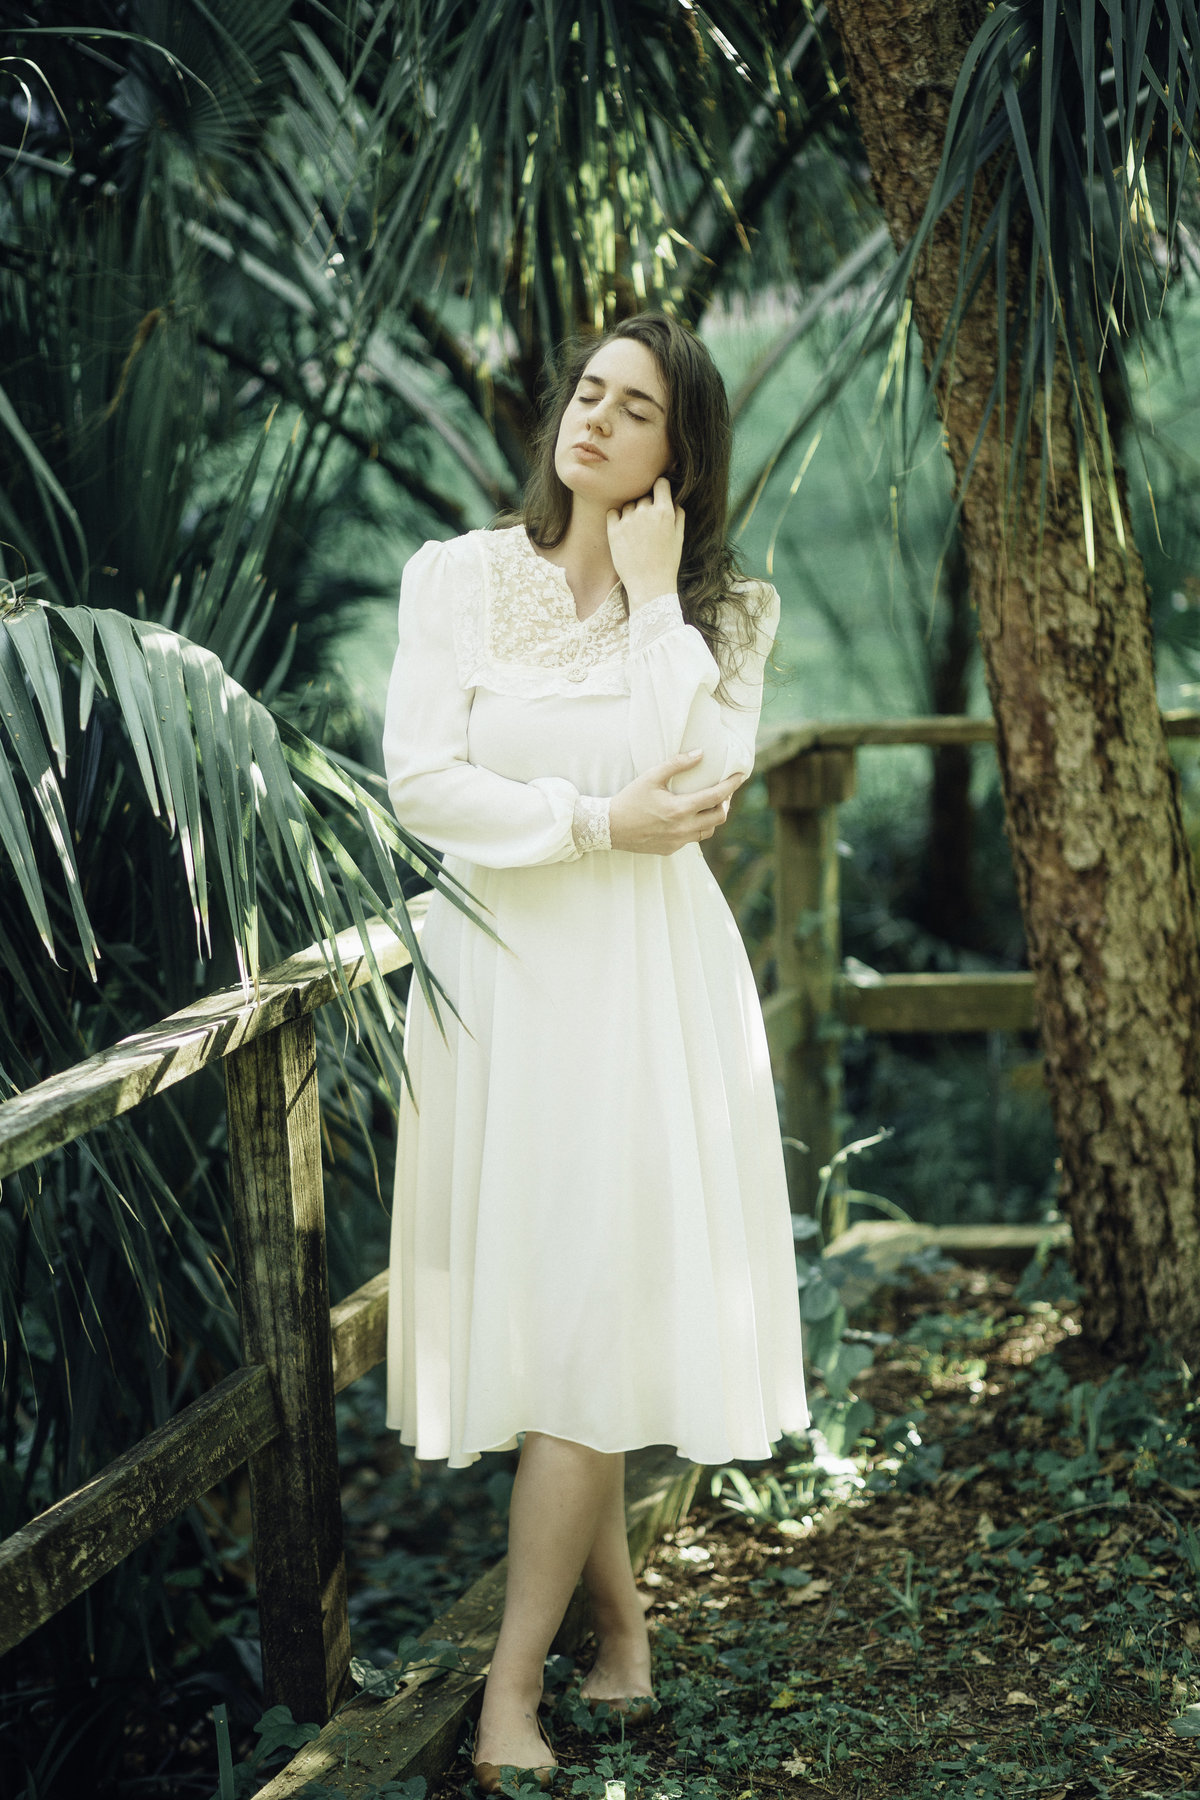 Portrait Photo Of Young Woman In White Dress Holding Her Cheek With Her Eyes Closed Los Angeles